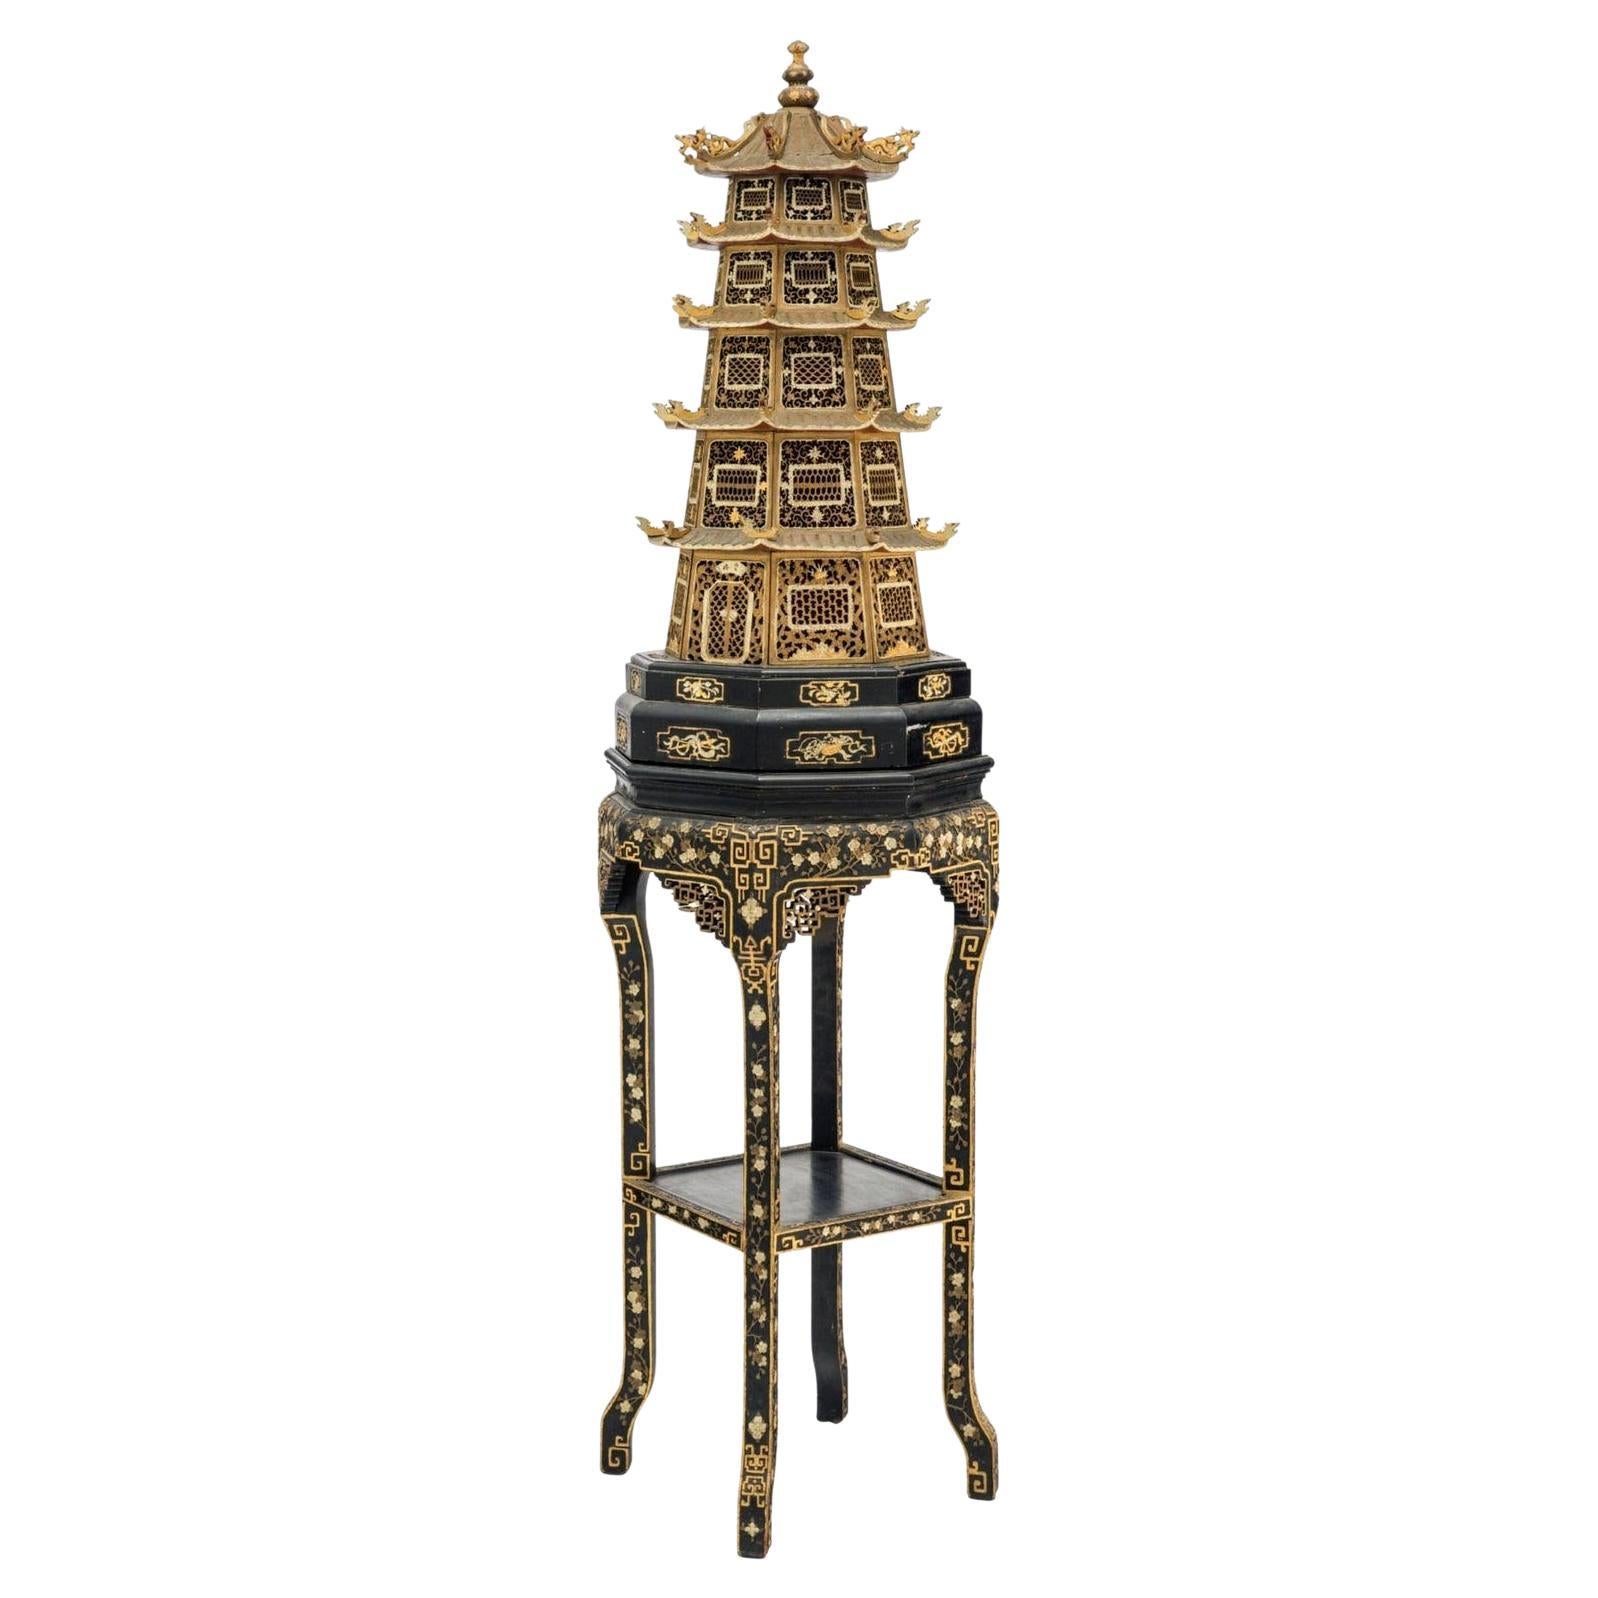 Rare Antique Chinese Sculptural Pagoda On Stand Fashioned As A Floor Lamp